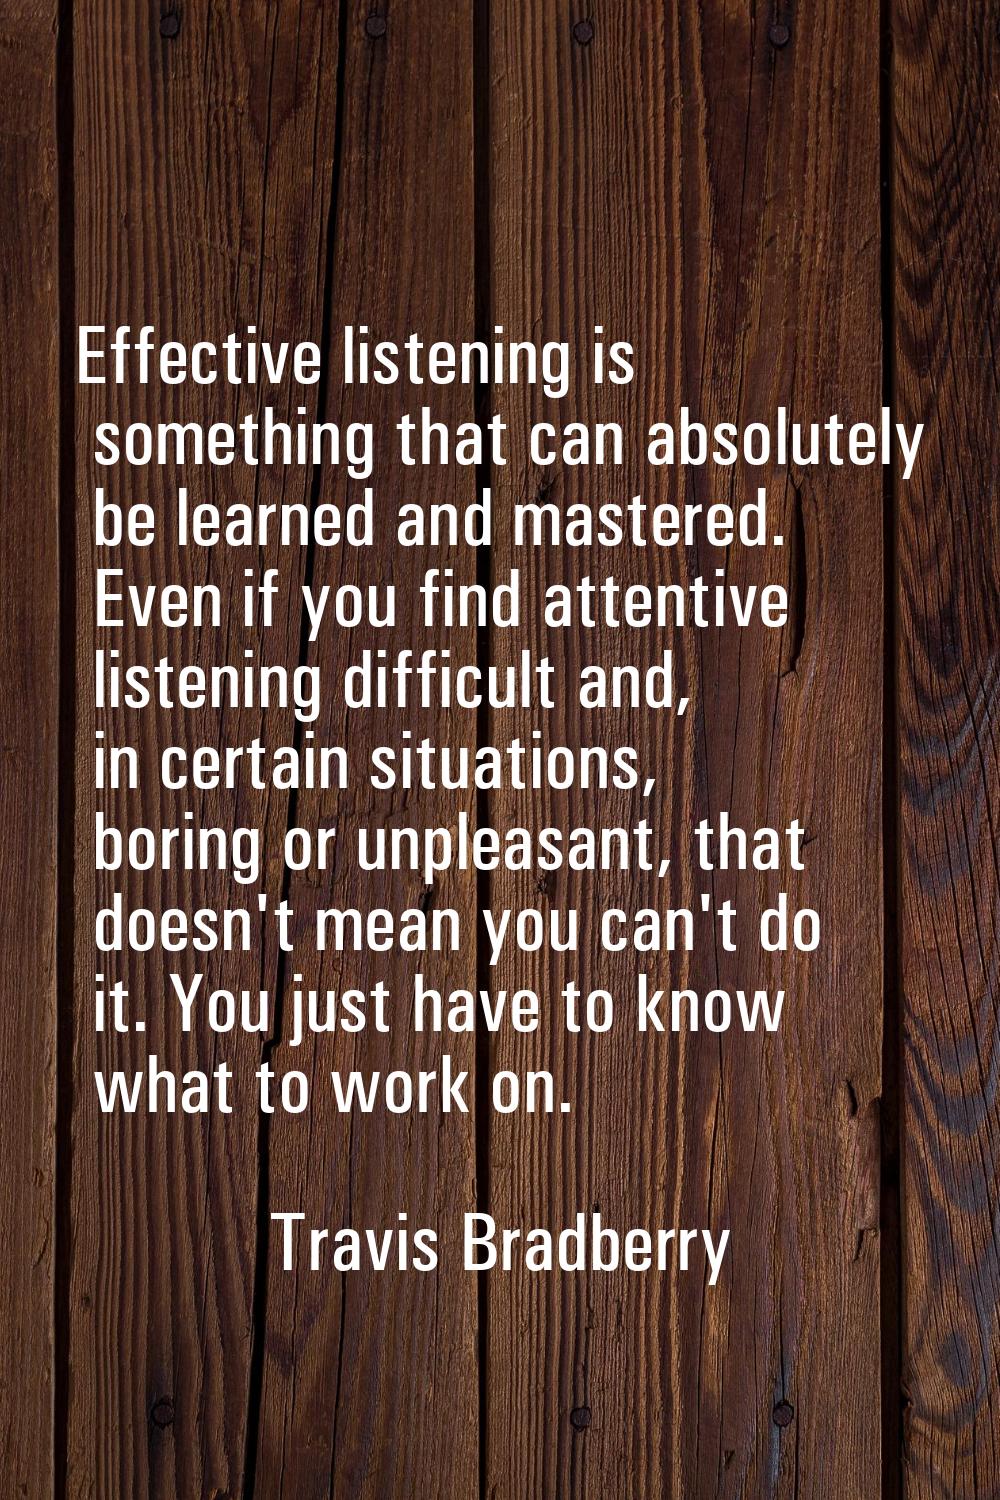 Effective listening is something that can absolutely be learned and mastered. Even if you find atte